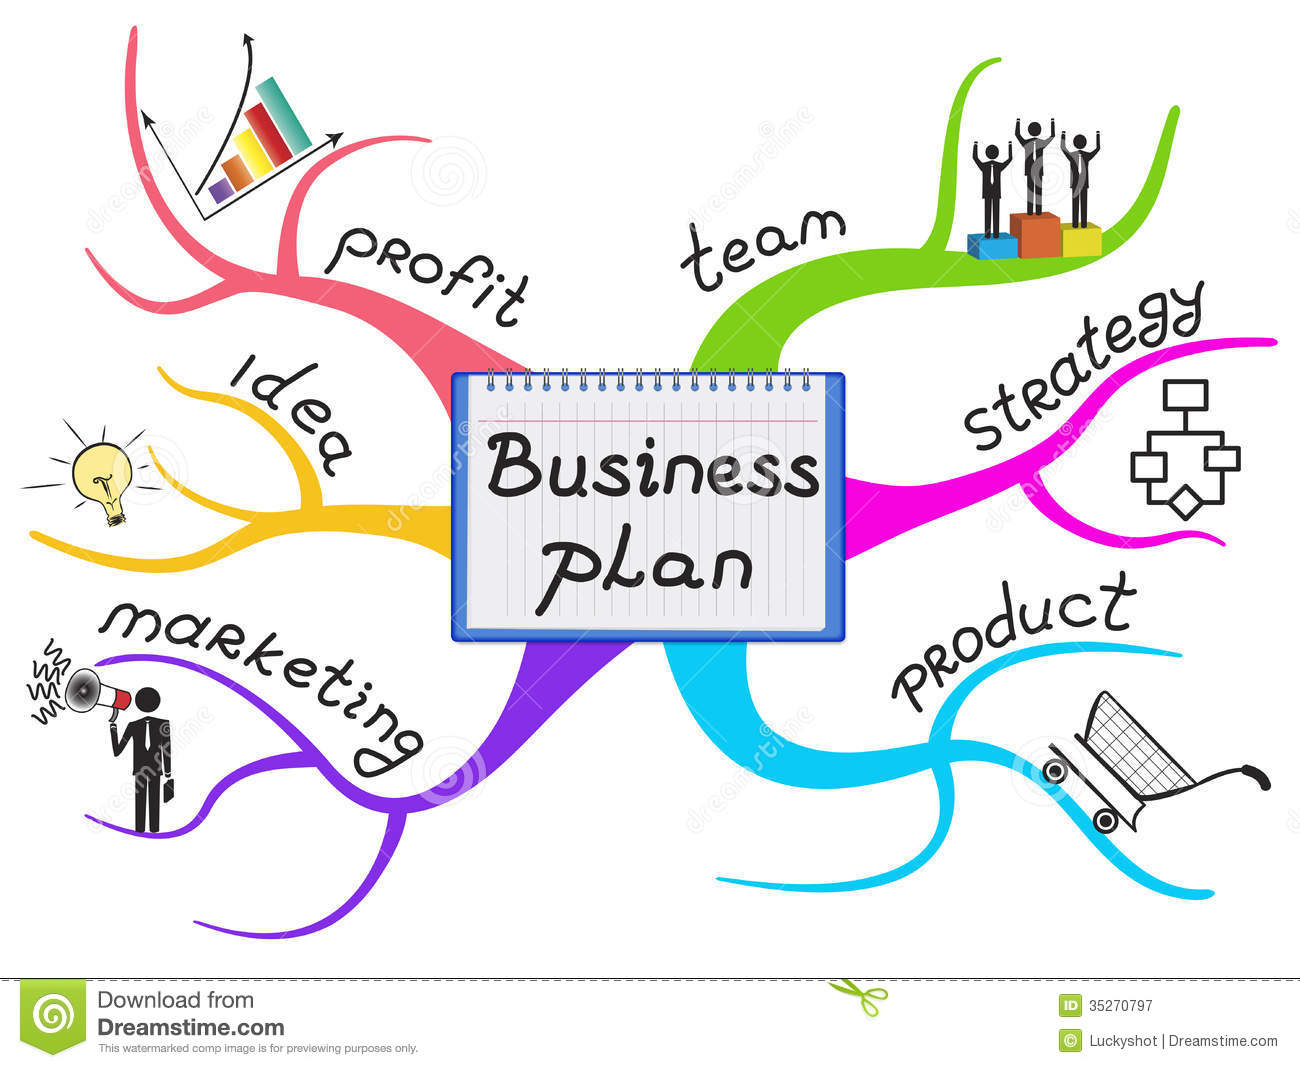 mind mapping business plan